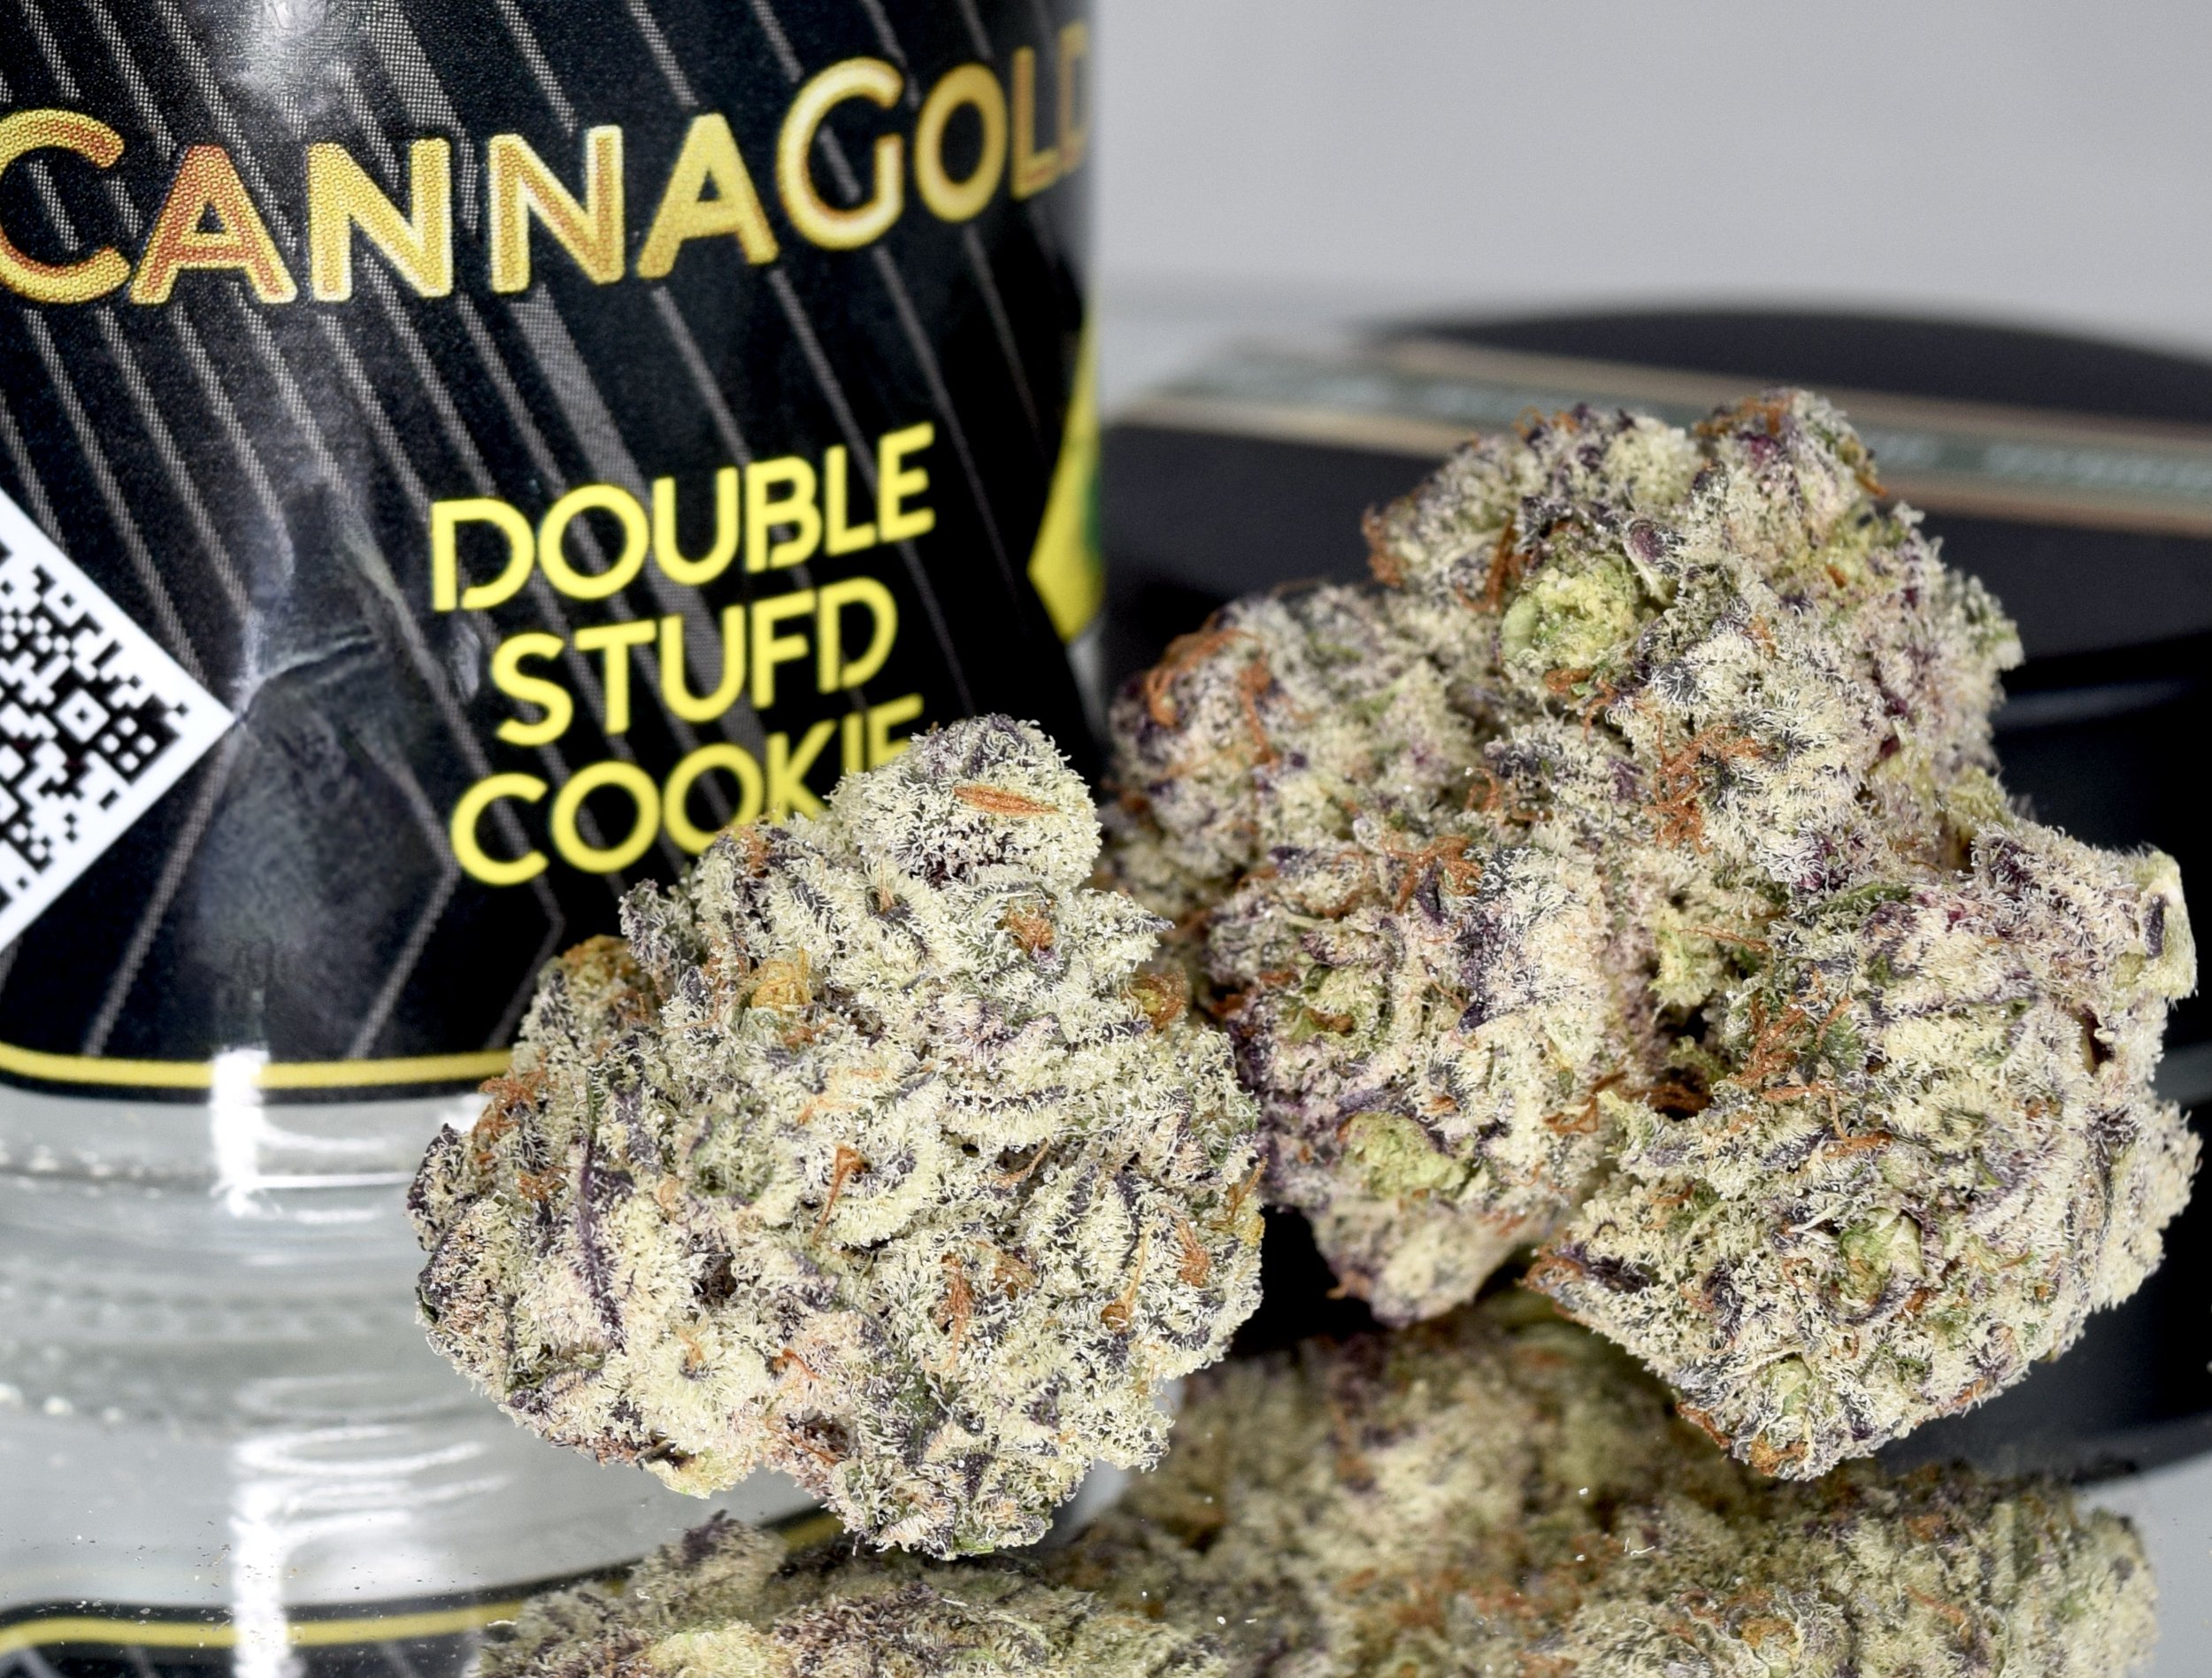  CannaGold Double Stufd Cookie 